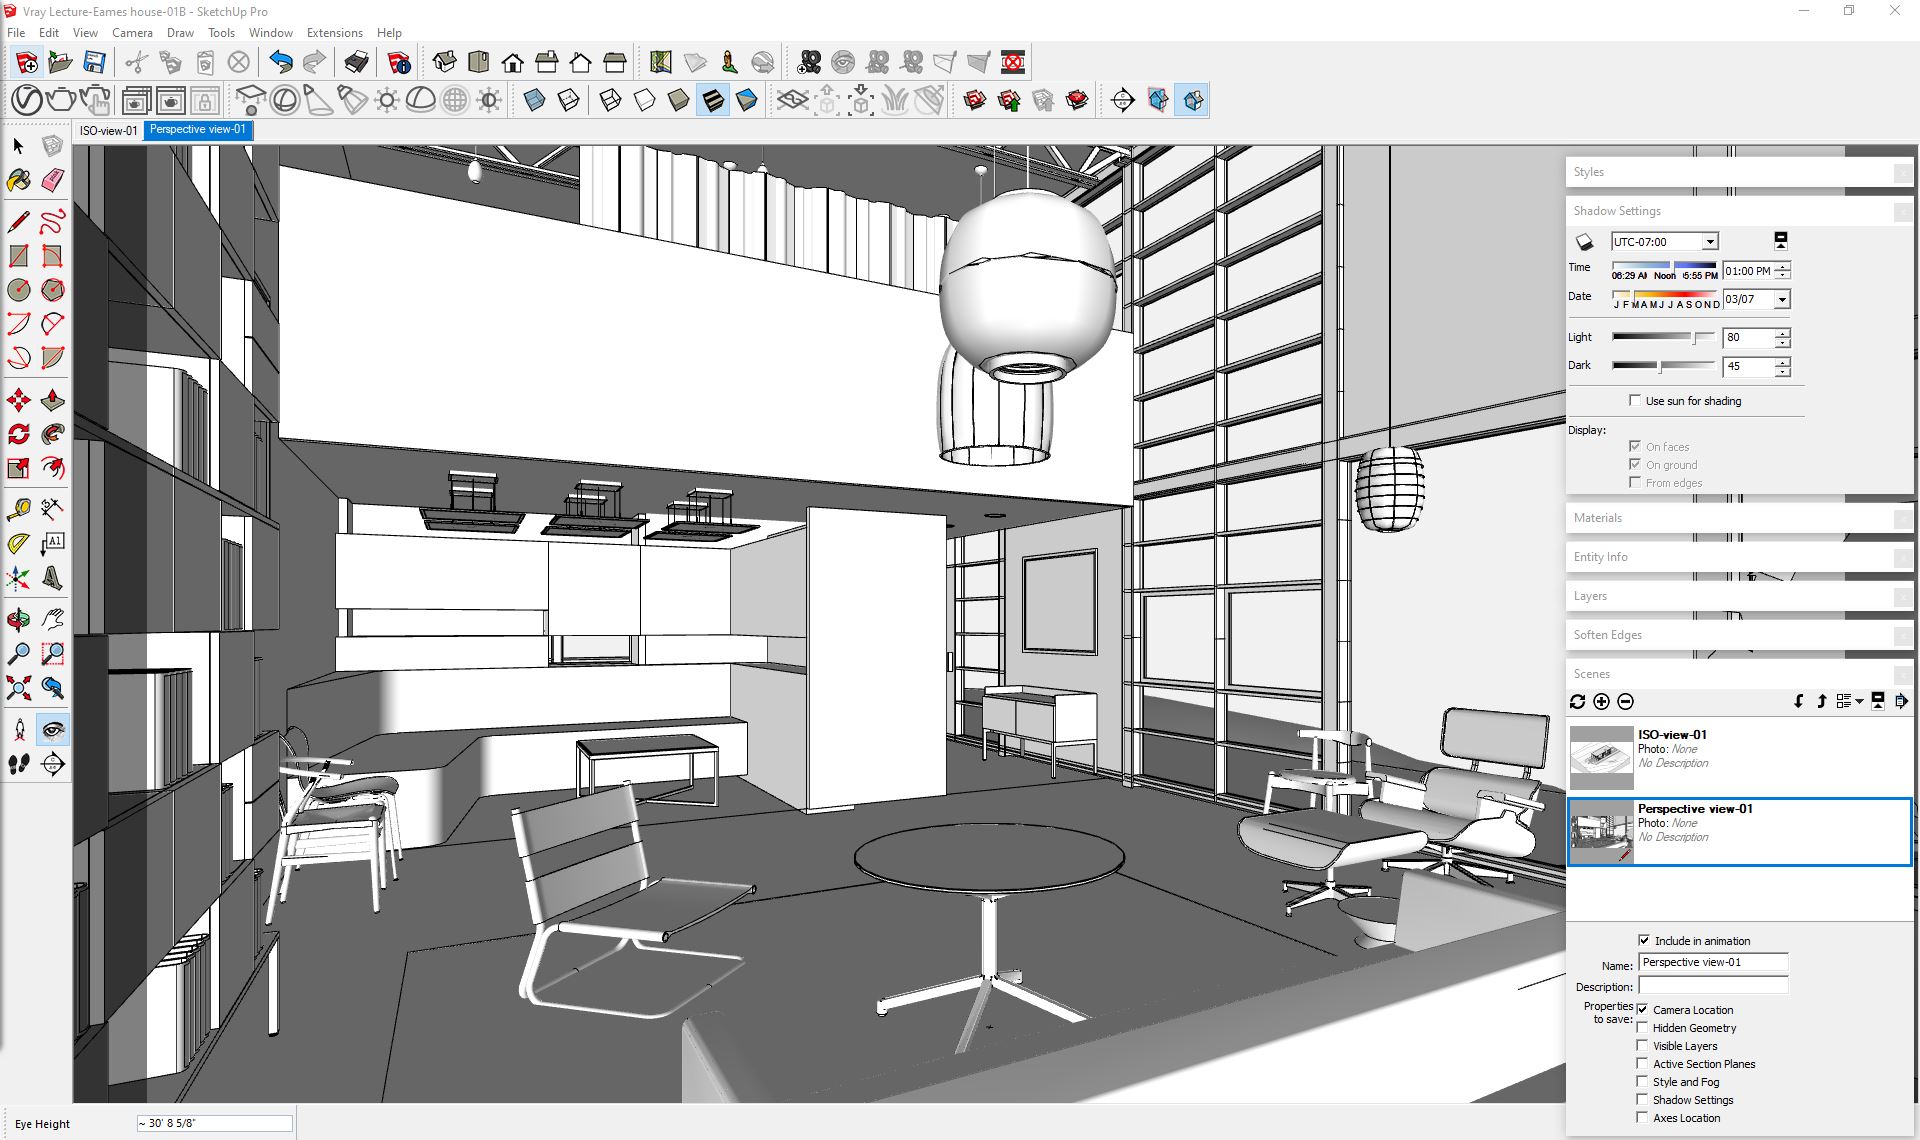 It indicates how to add a scene in SketchUp for a rendering.